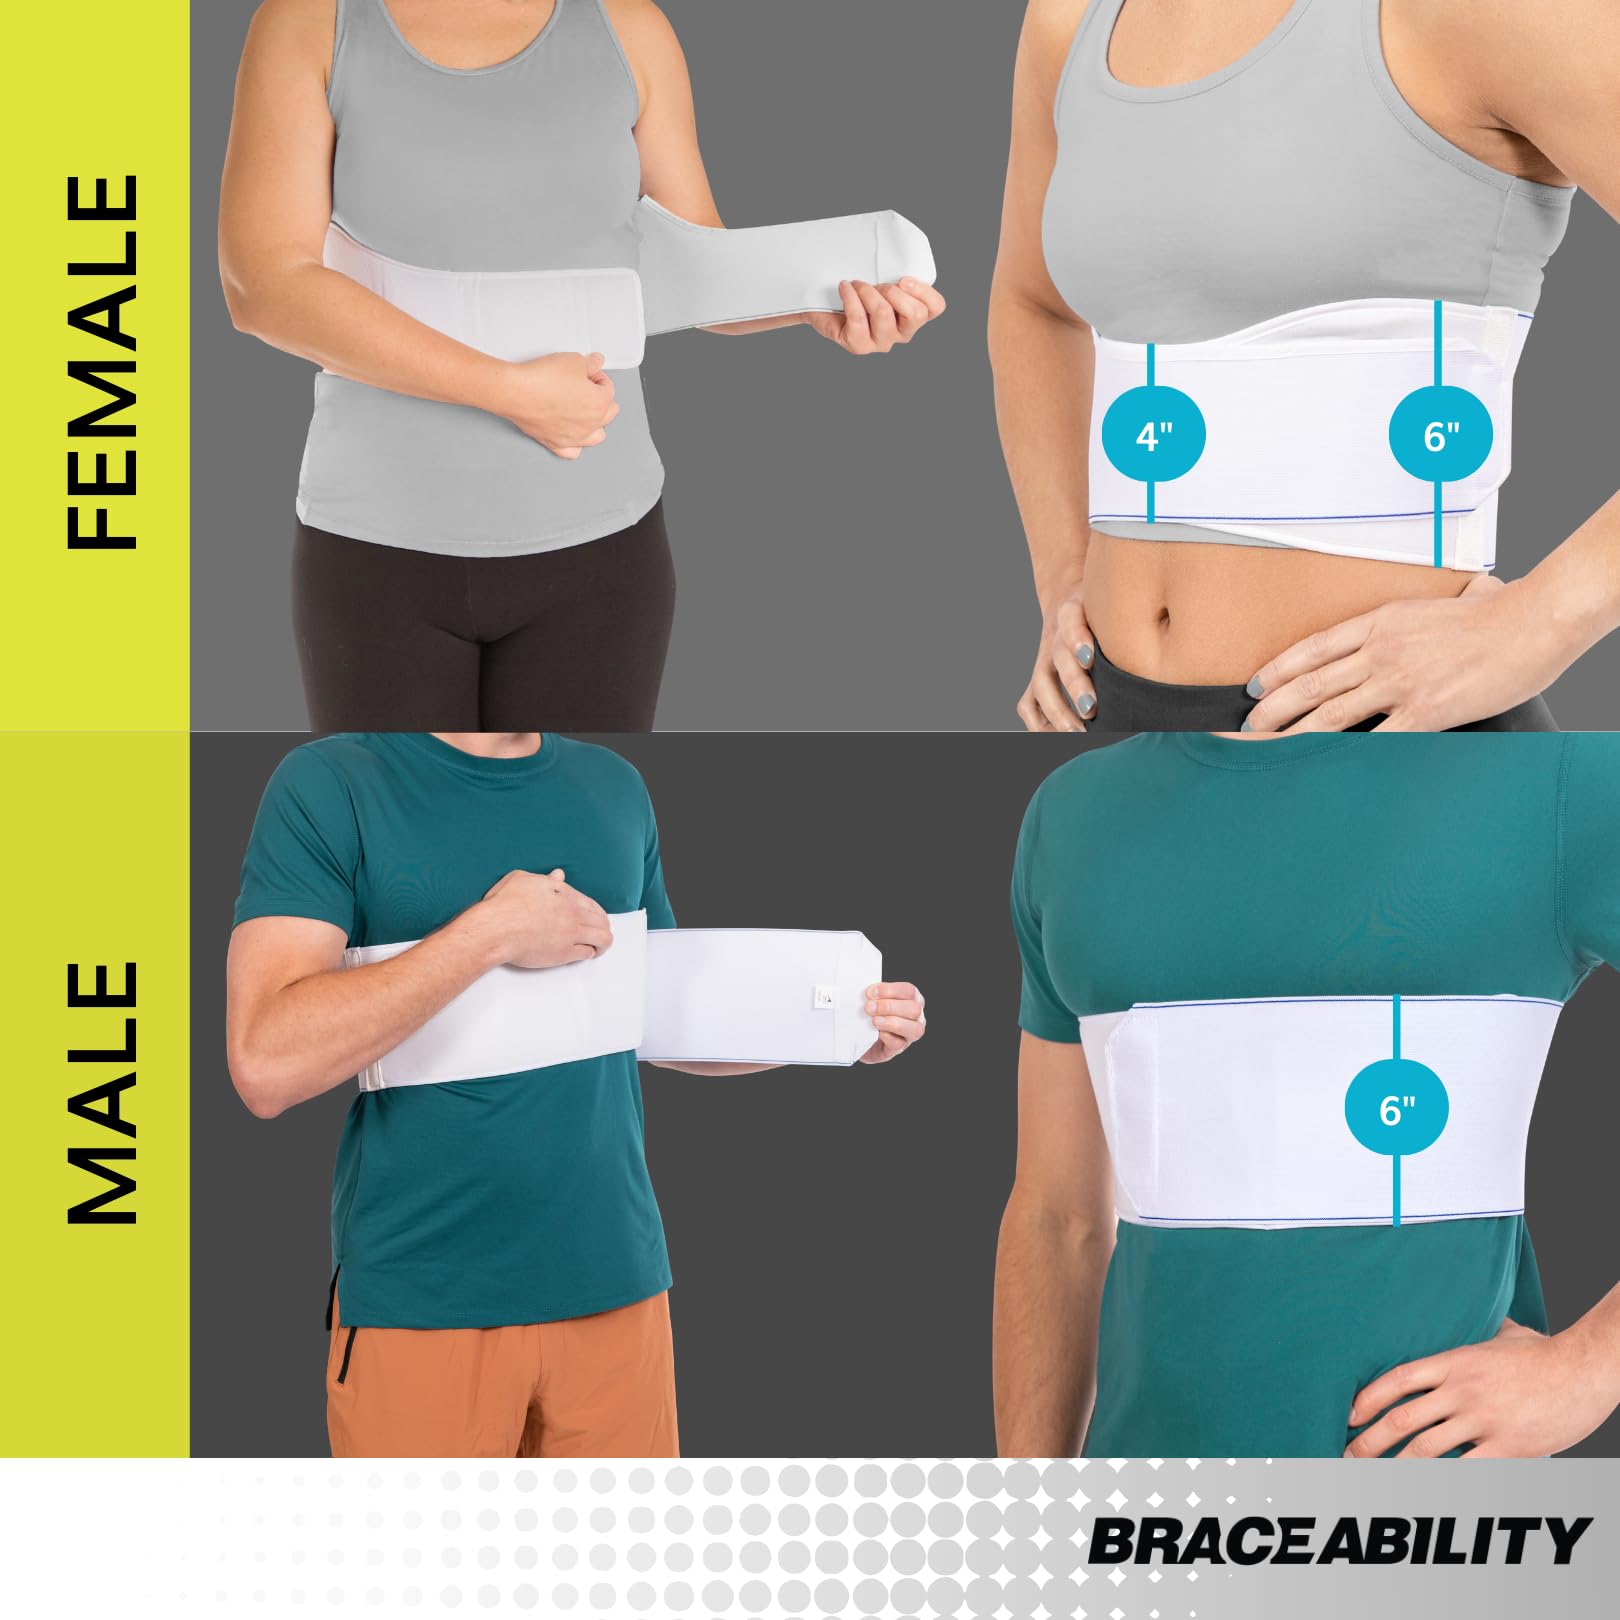 BraceAbility Rib Injury Binder Belt - Female Universal Broken Rib Brace for Cracked Ribs, Rib Cage Protector Wrap for Sore or Bruised Support, Sternum Injury for Women (Fits 36”-58”)